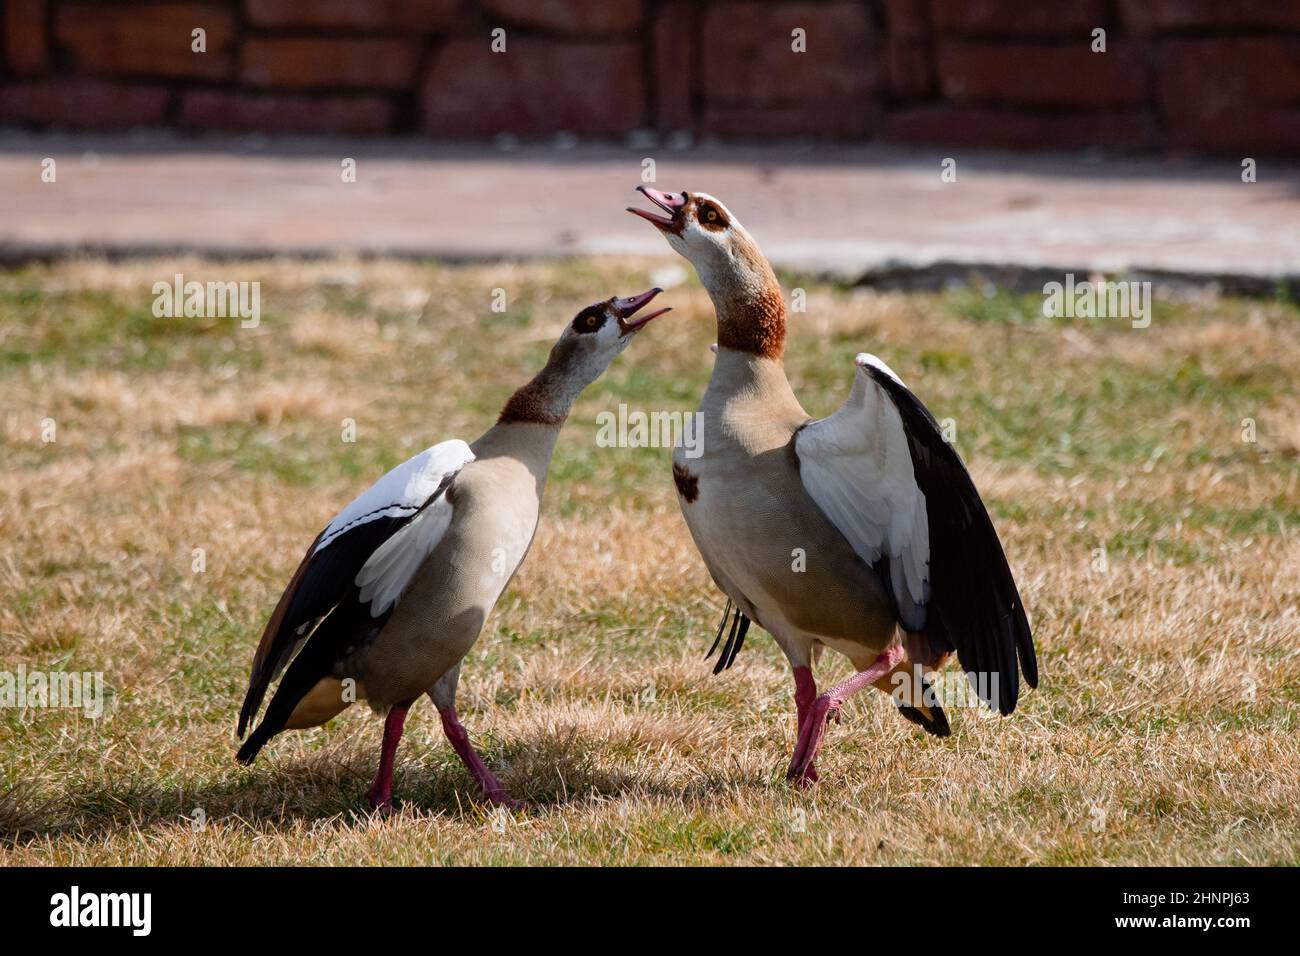 Two Egyptian Geese facing each other on the grass (Alopochen aegyptiaca) Stock Photo